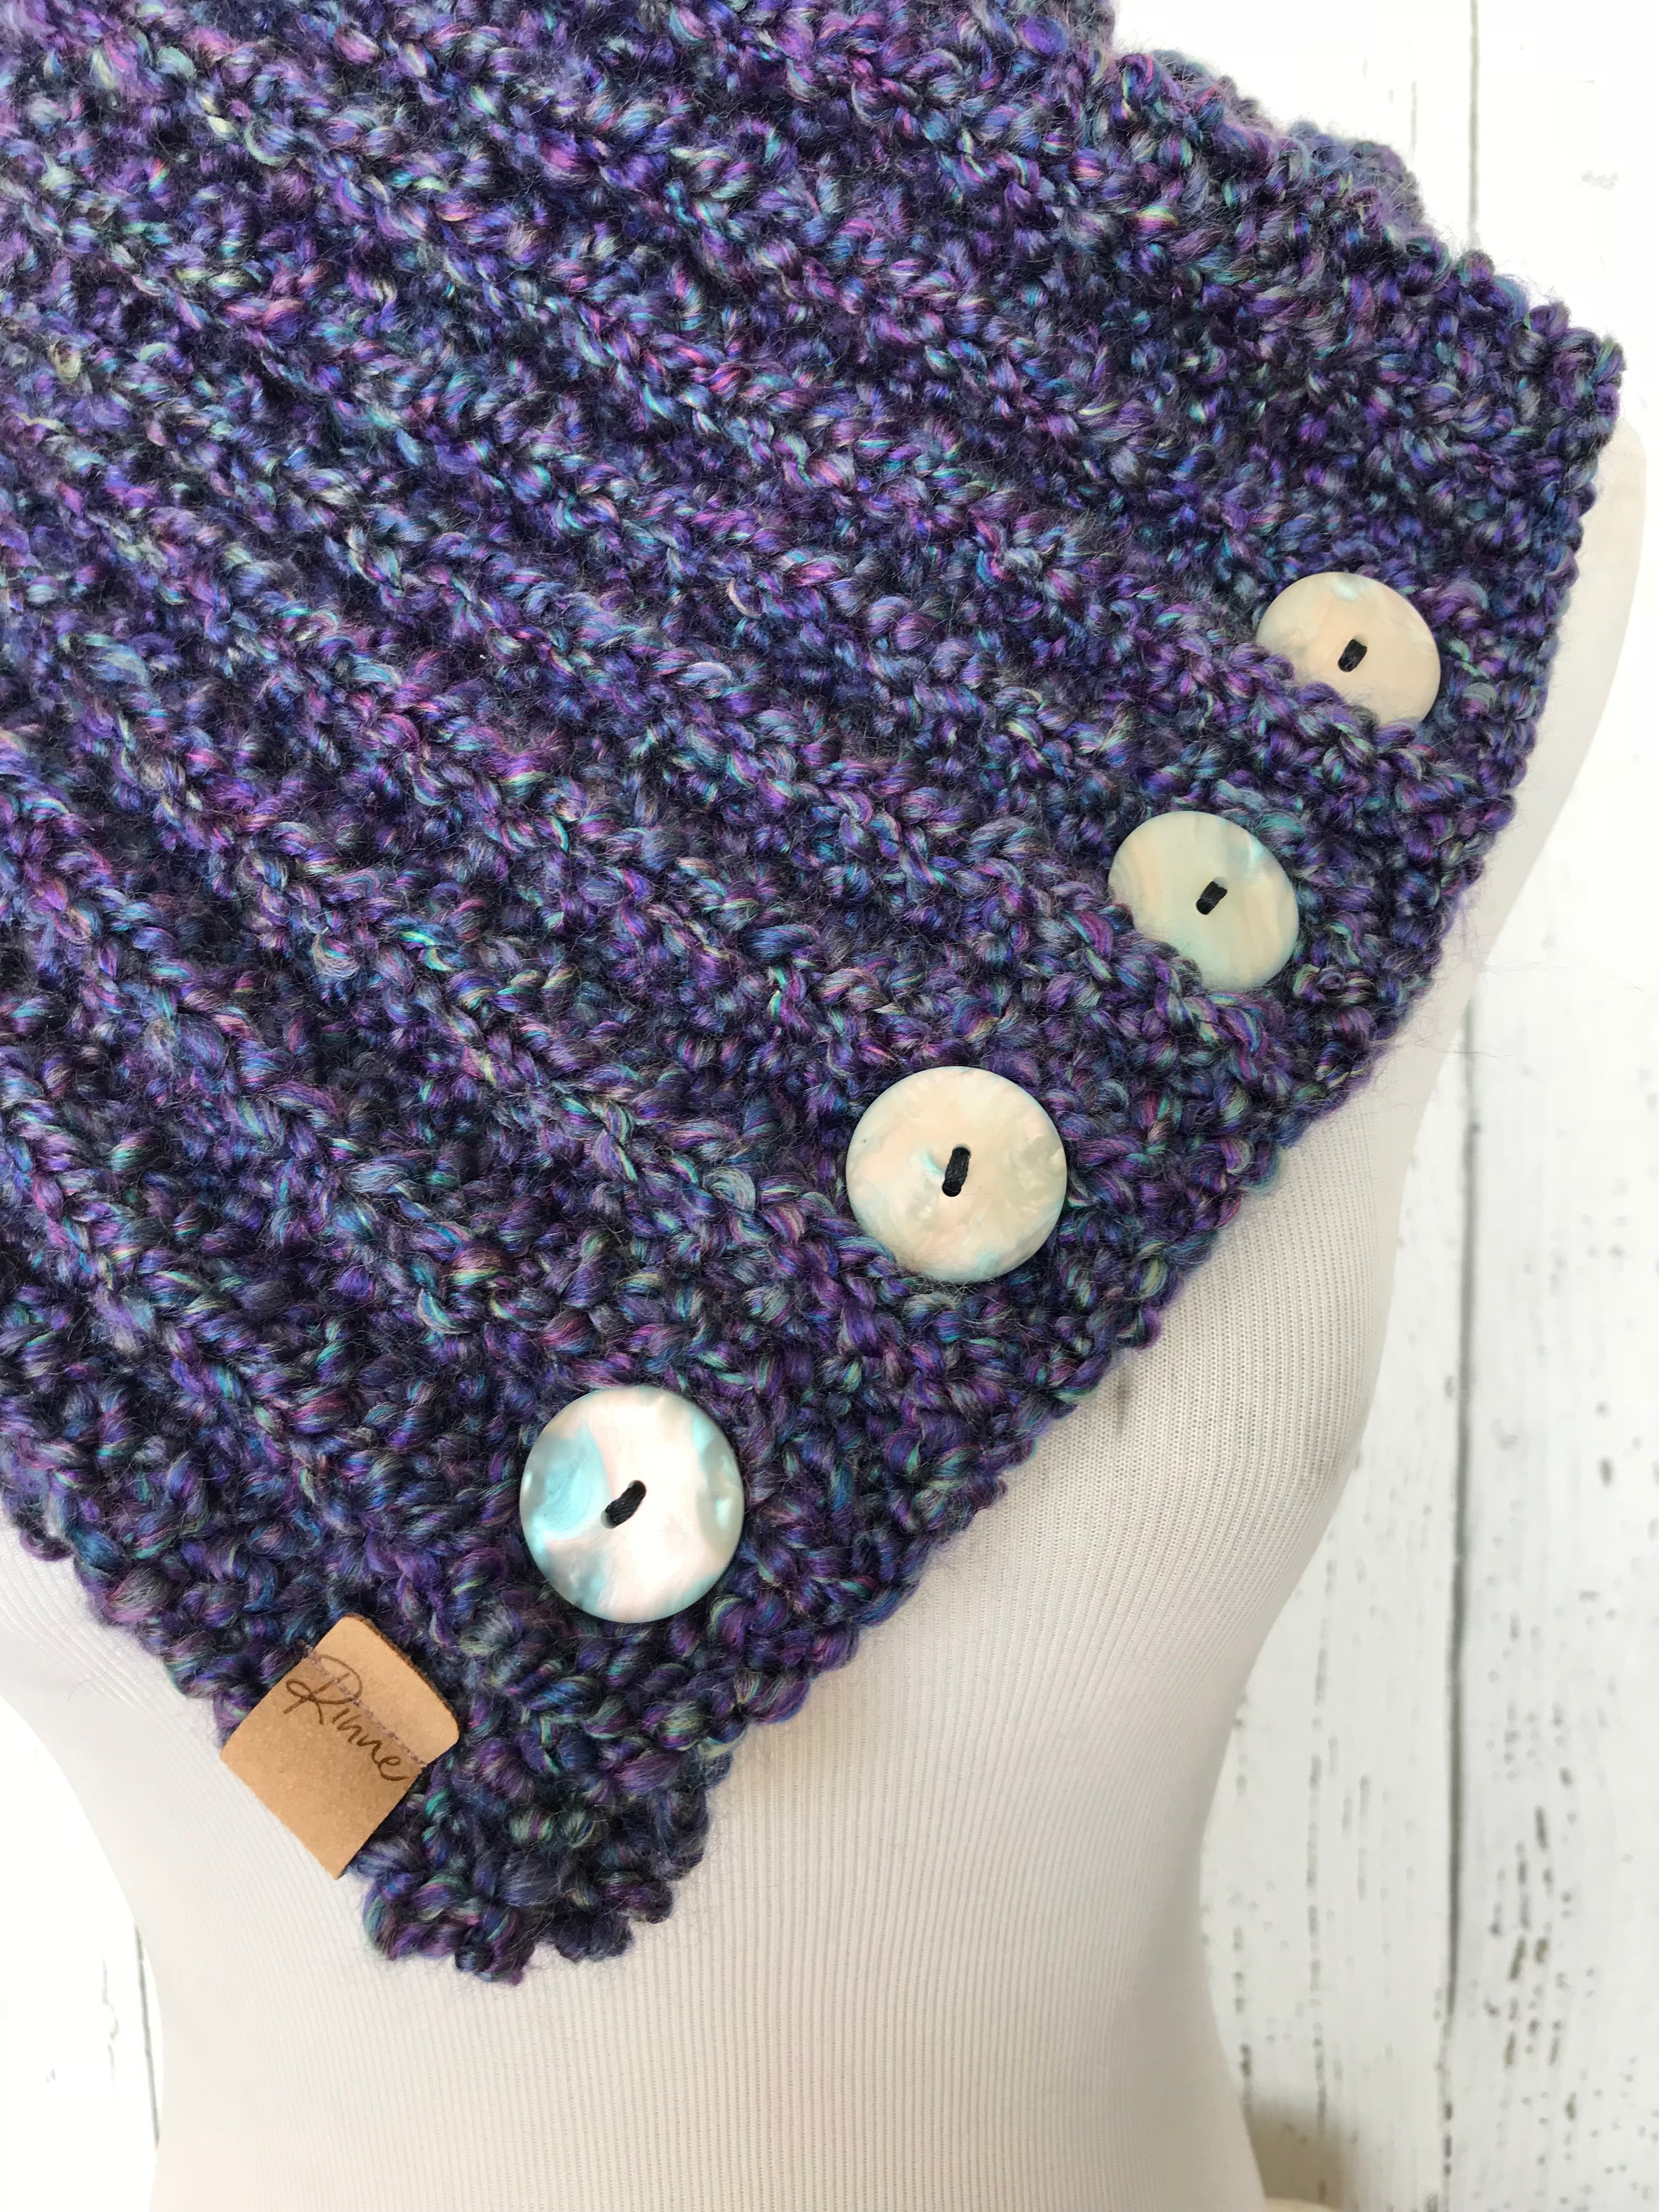 Classic Knit Button Cowl in heathered blue and purple, with shell buttons